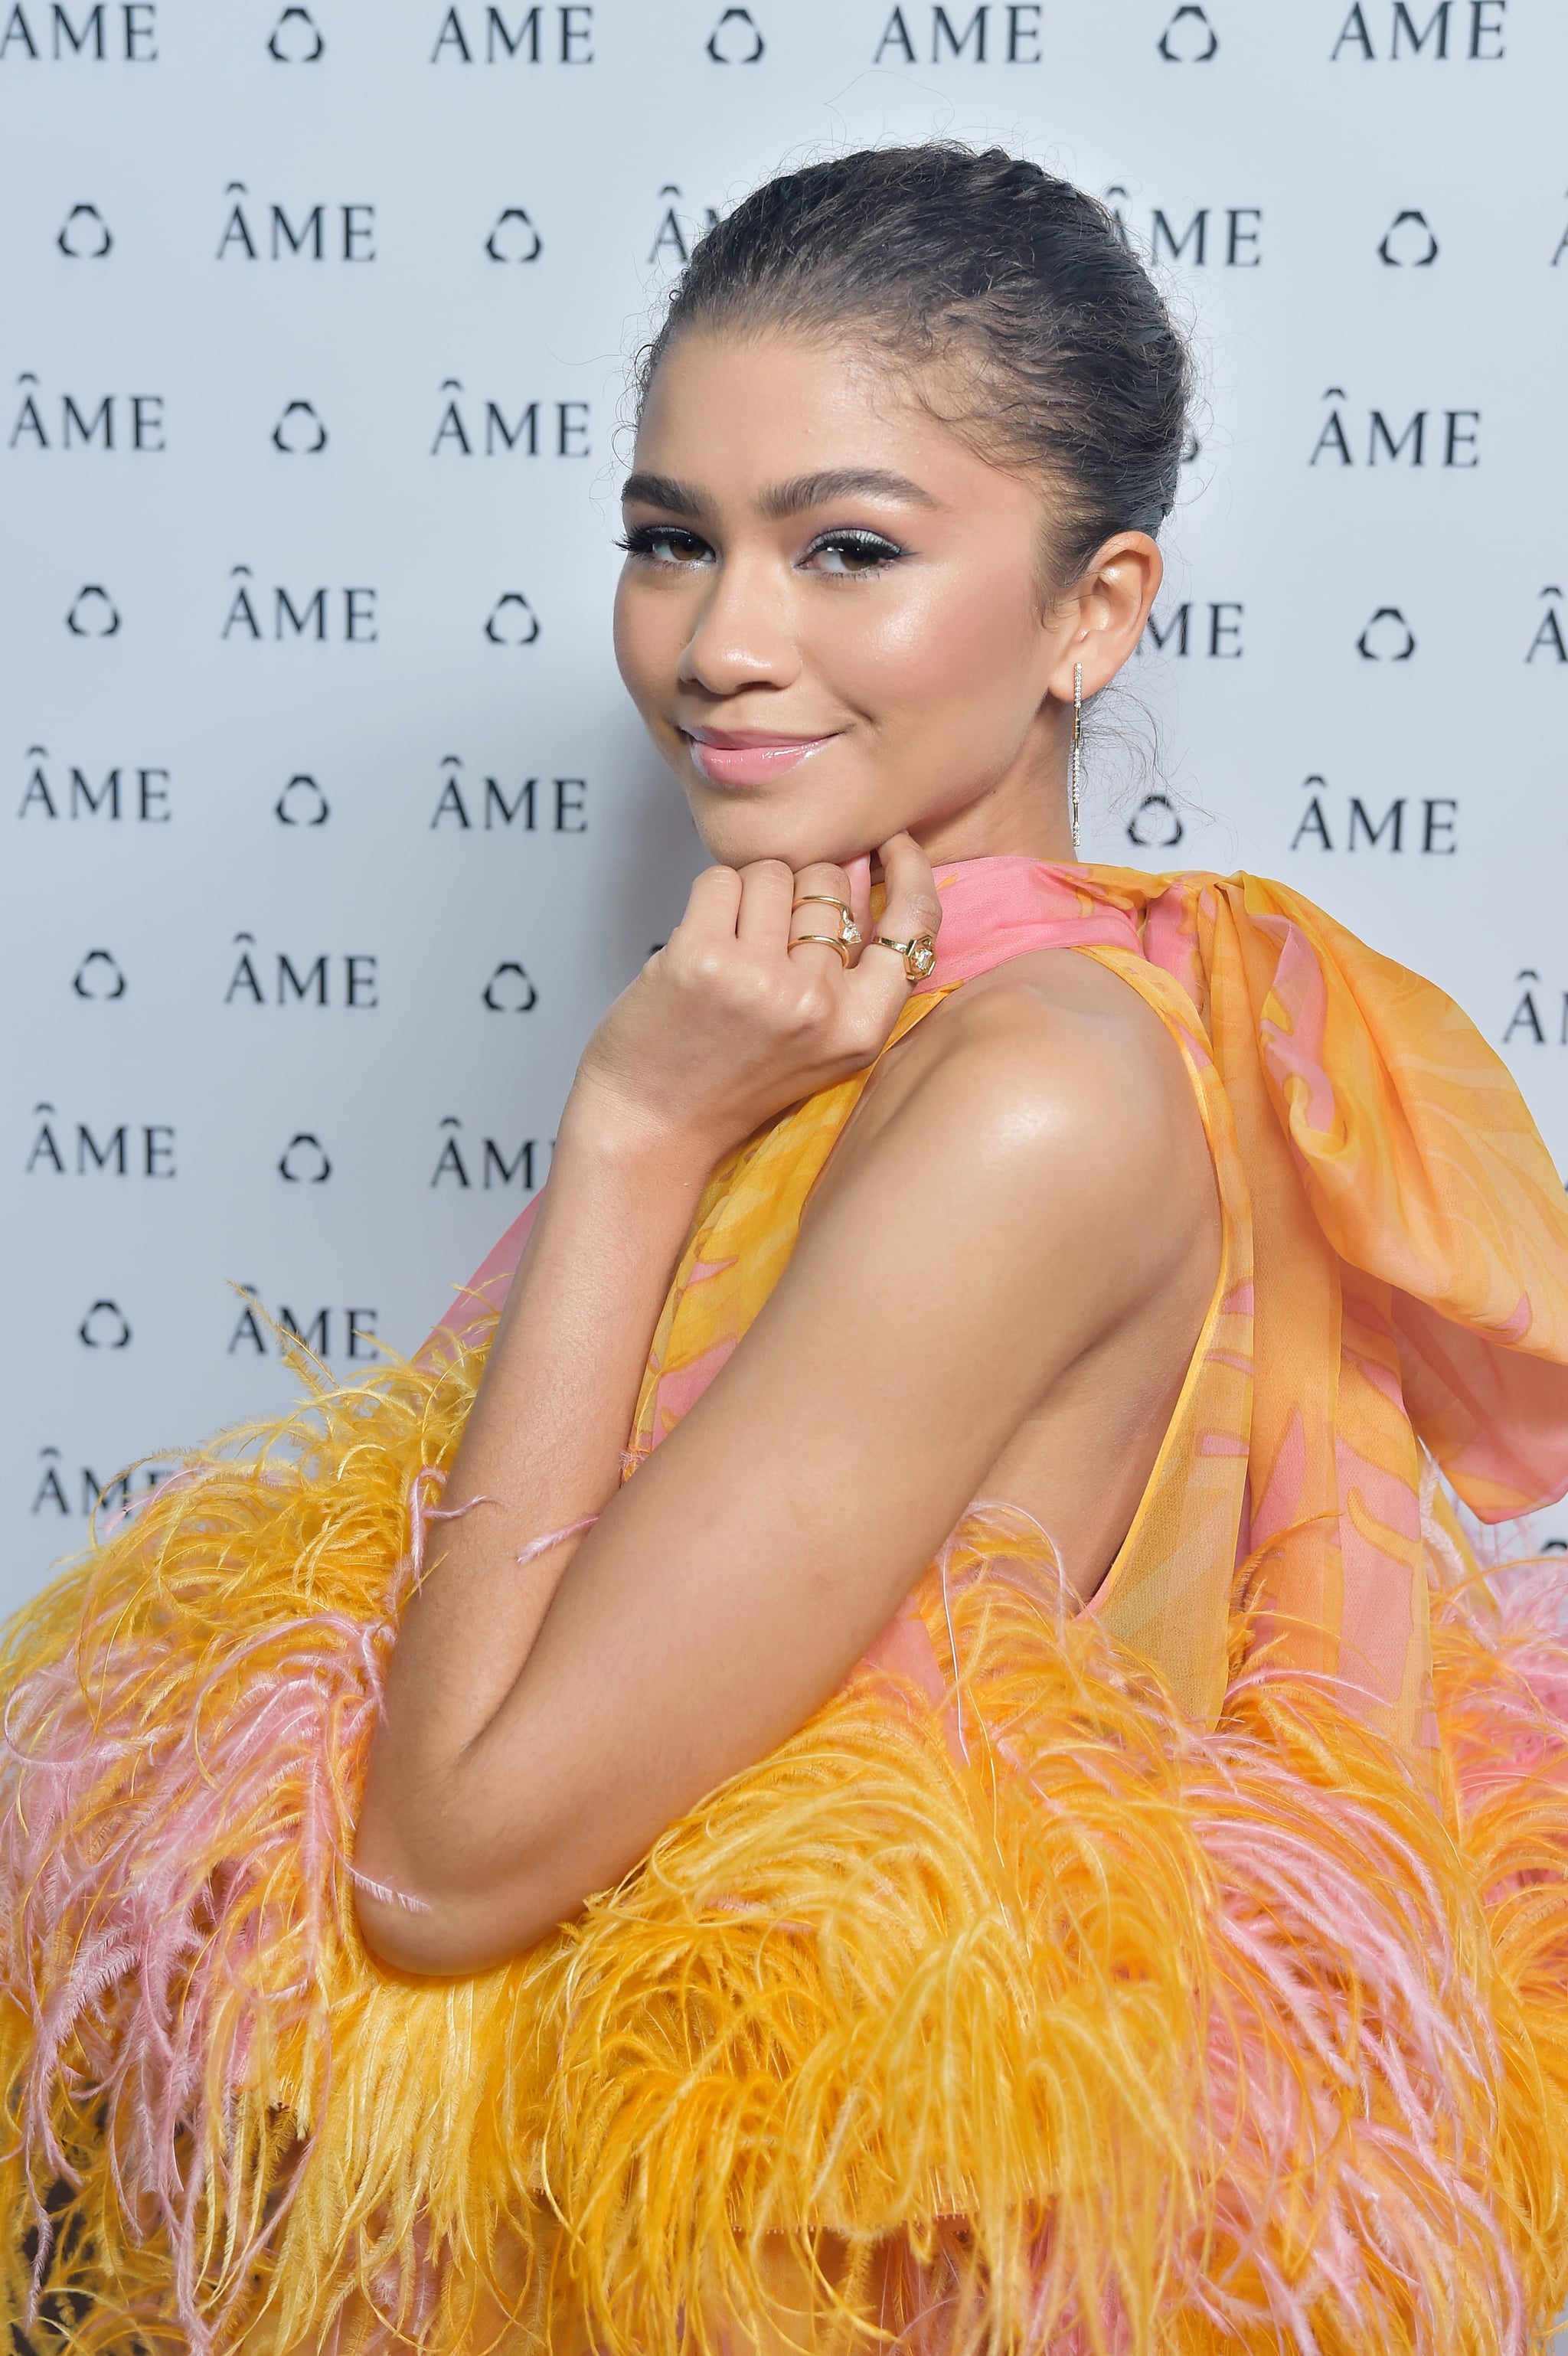 LOS ANGELES, CA - DECEMBER 13:  Zendaya attends Áme Jewelry Launch Event on December 13, 2018 in Los Angeles, California.  (Photo by Stefanie Keenan/Getty Images for Áme Jewelry)